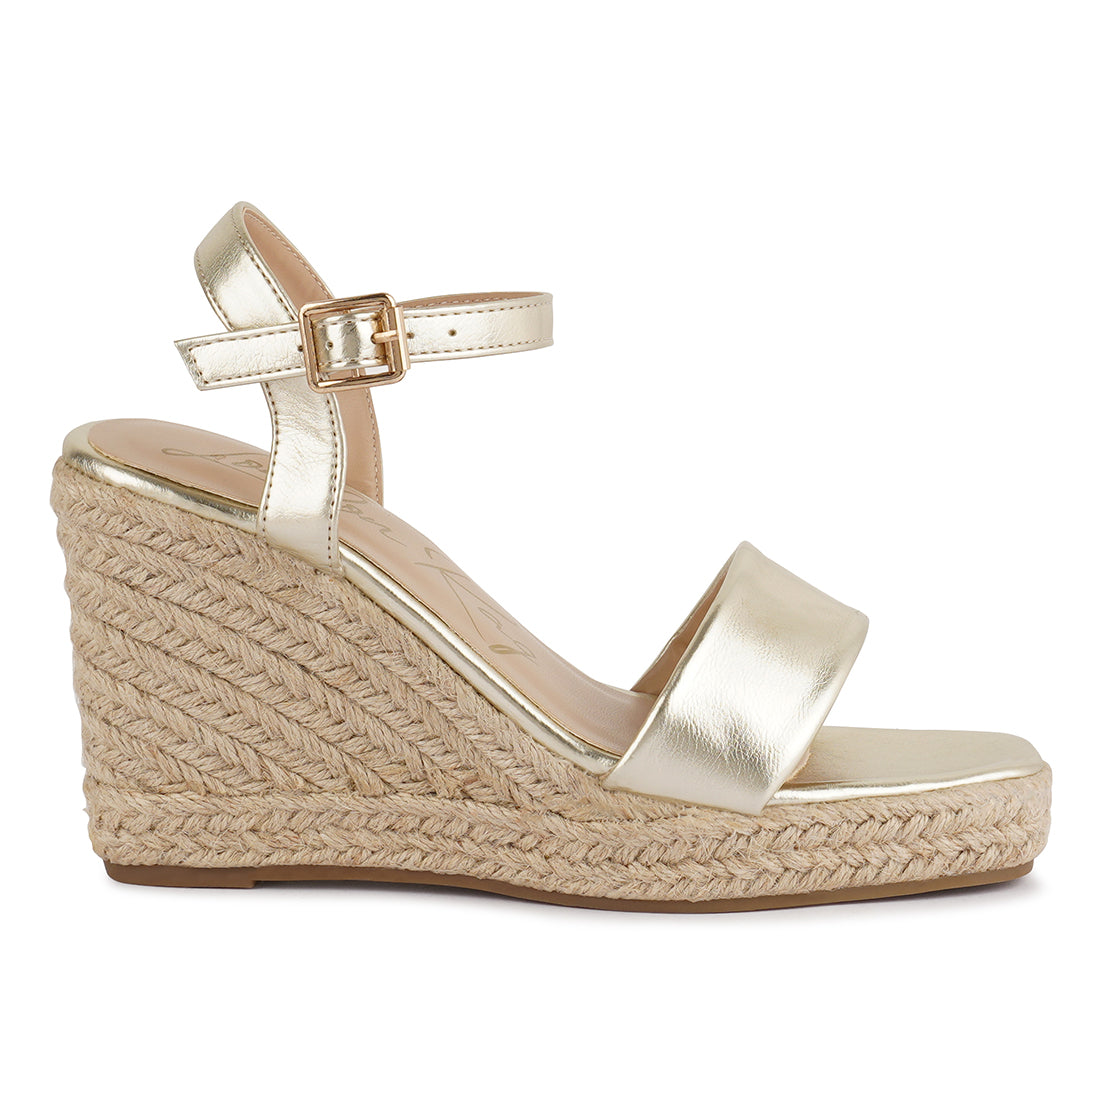 Gold Handcrafted Sandals with a High Wedge Heel